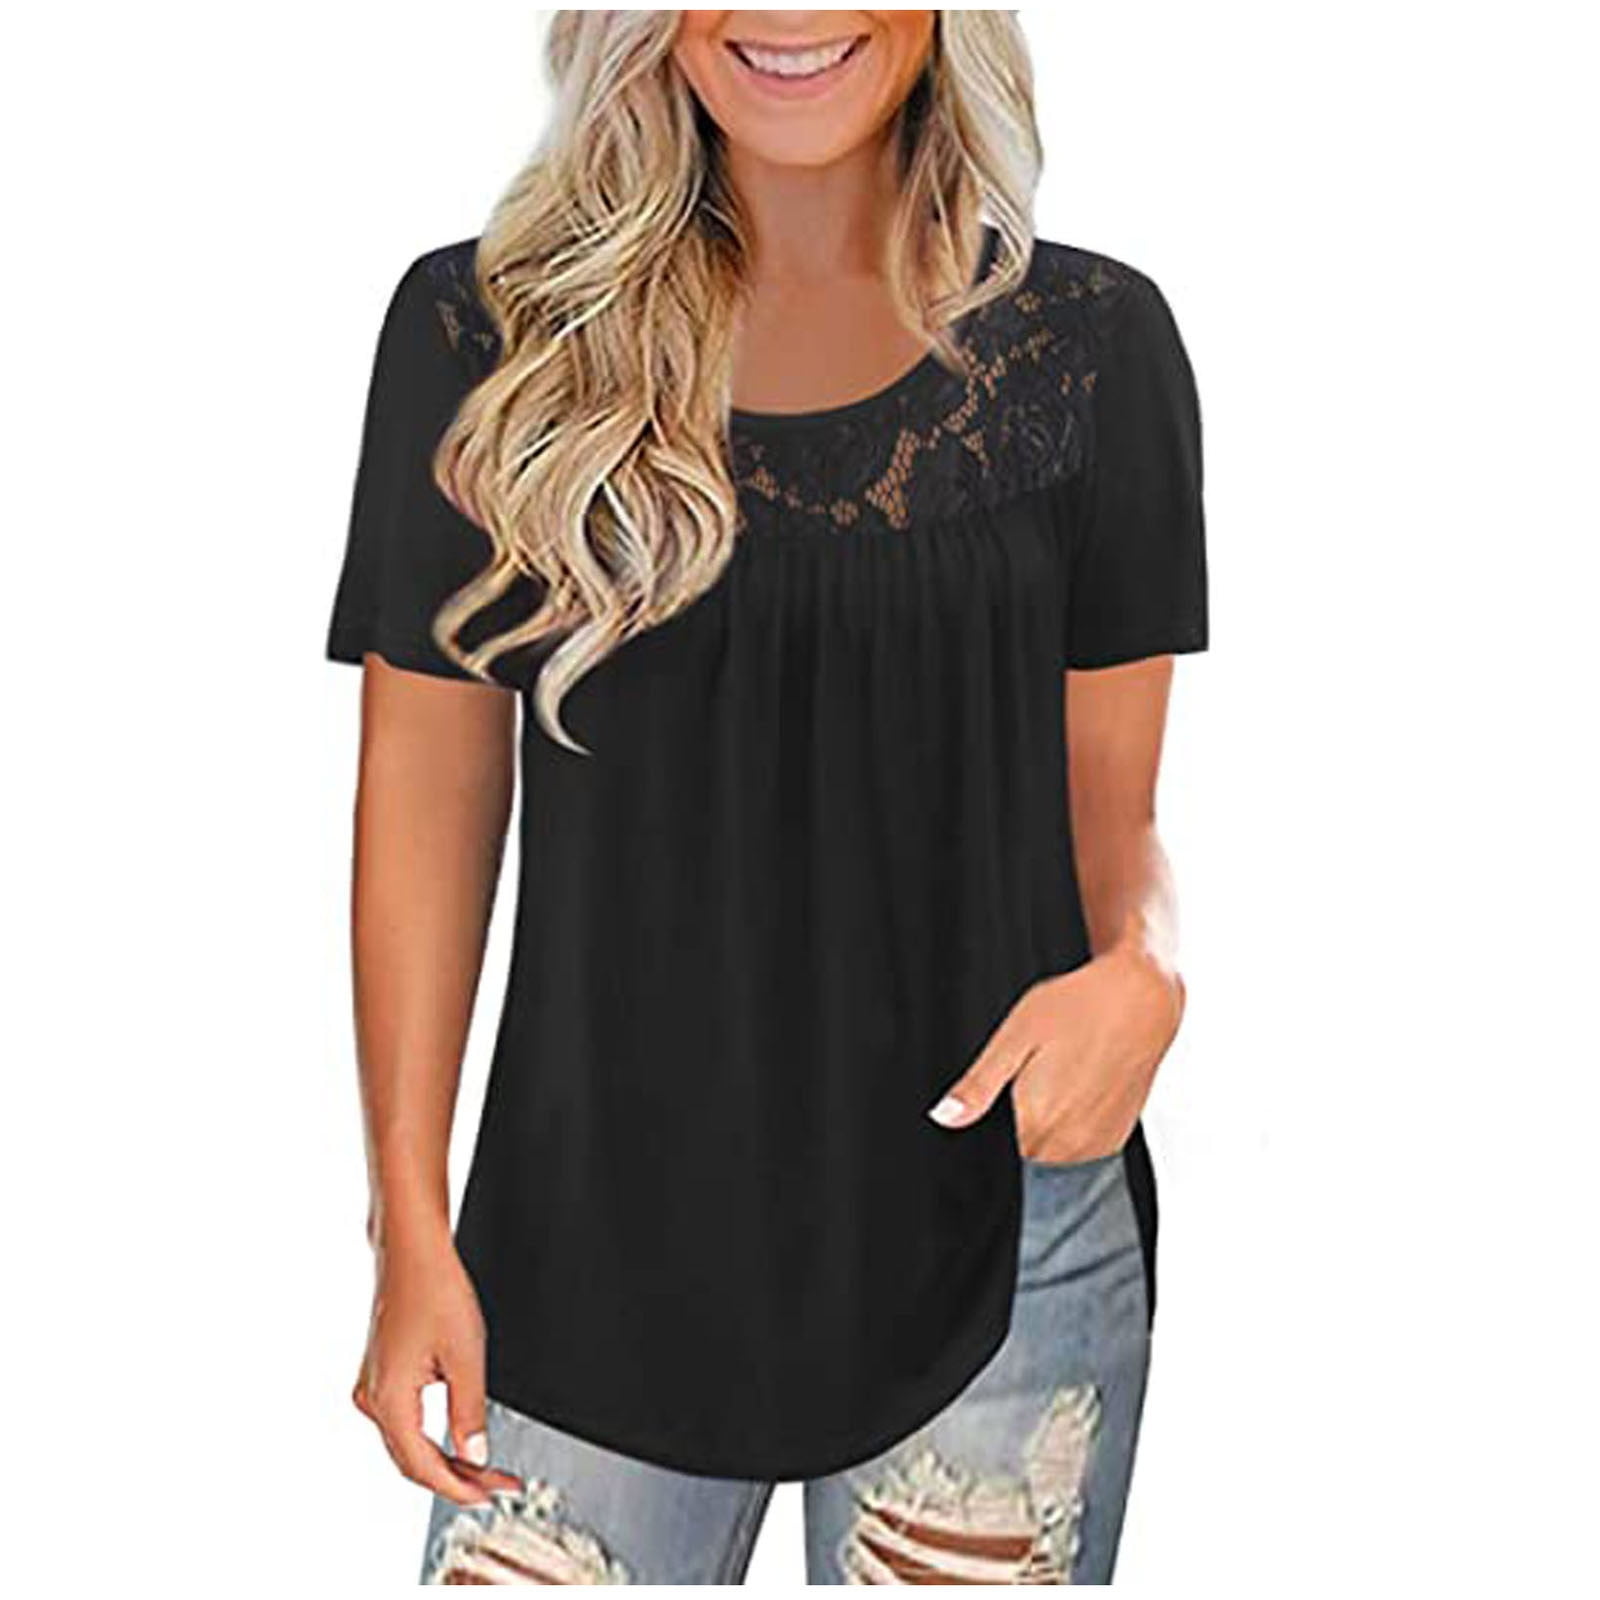 WHLBF Womens Plus Size Tops Clearance Lace Solid Splicing Short Sleeve ...